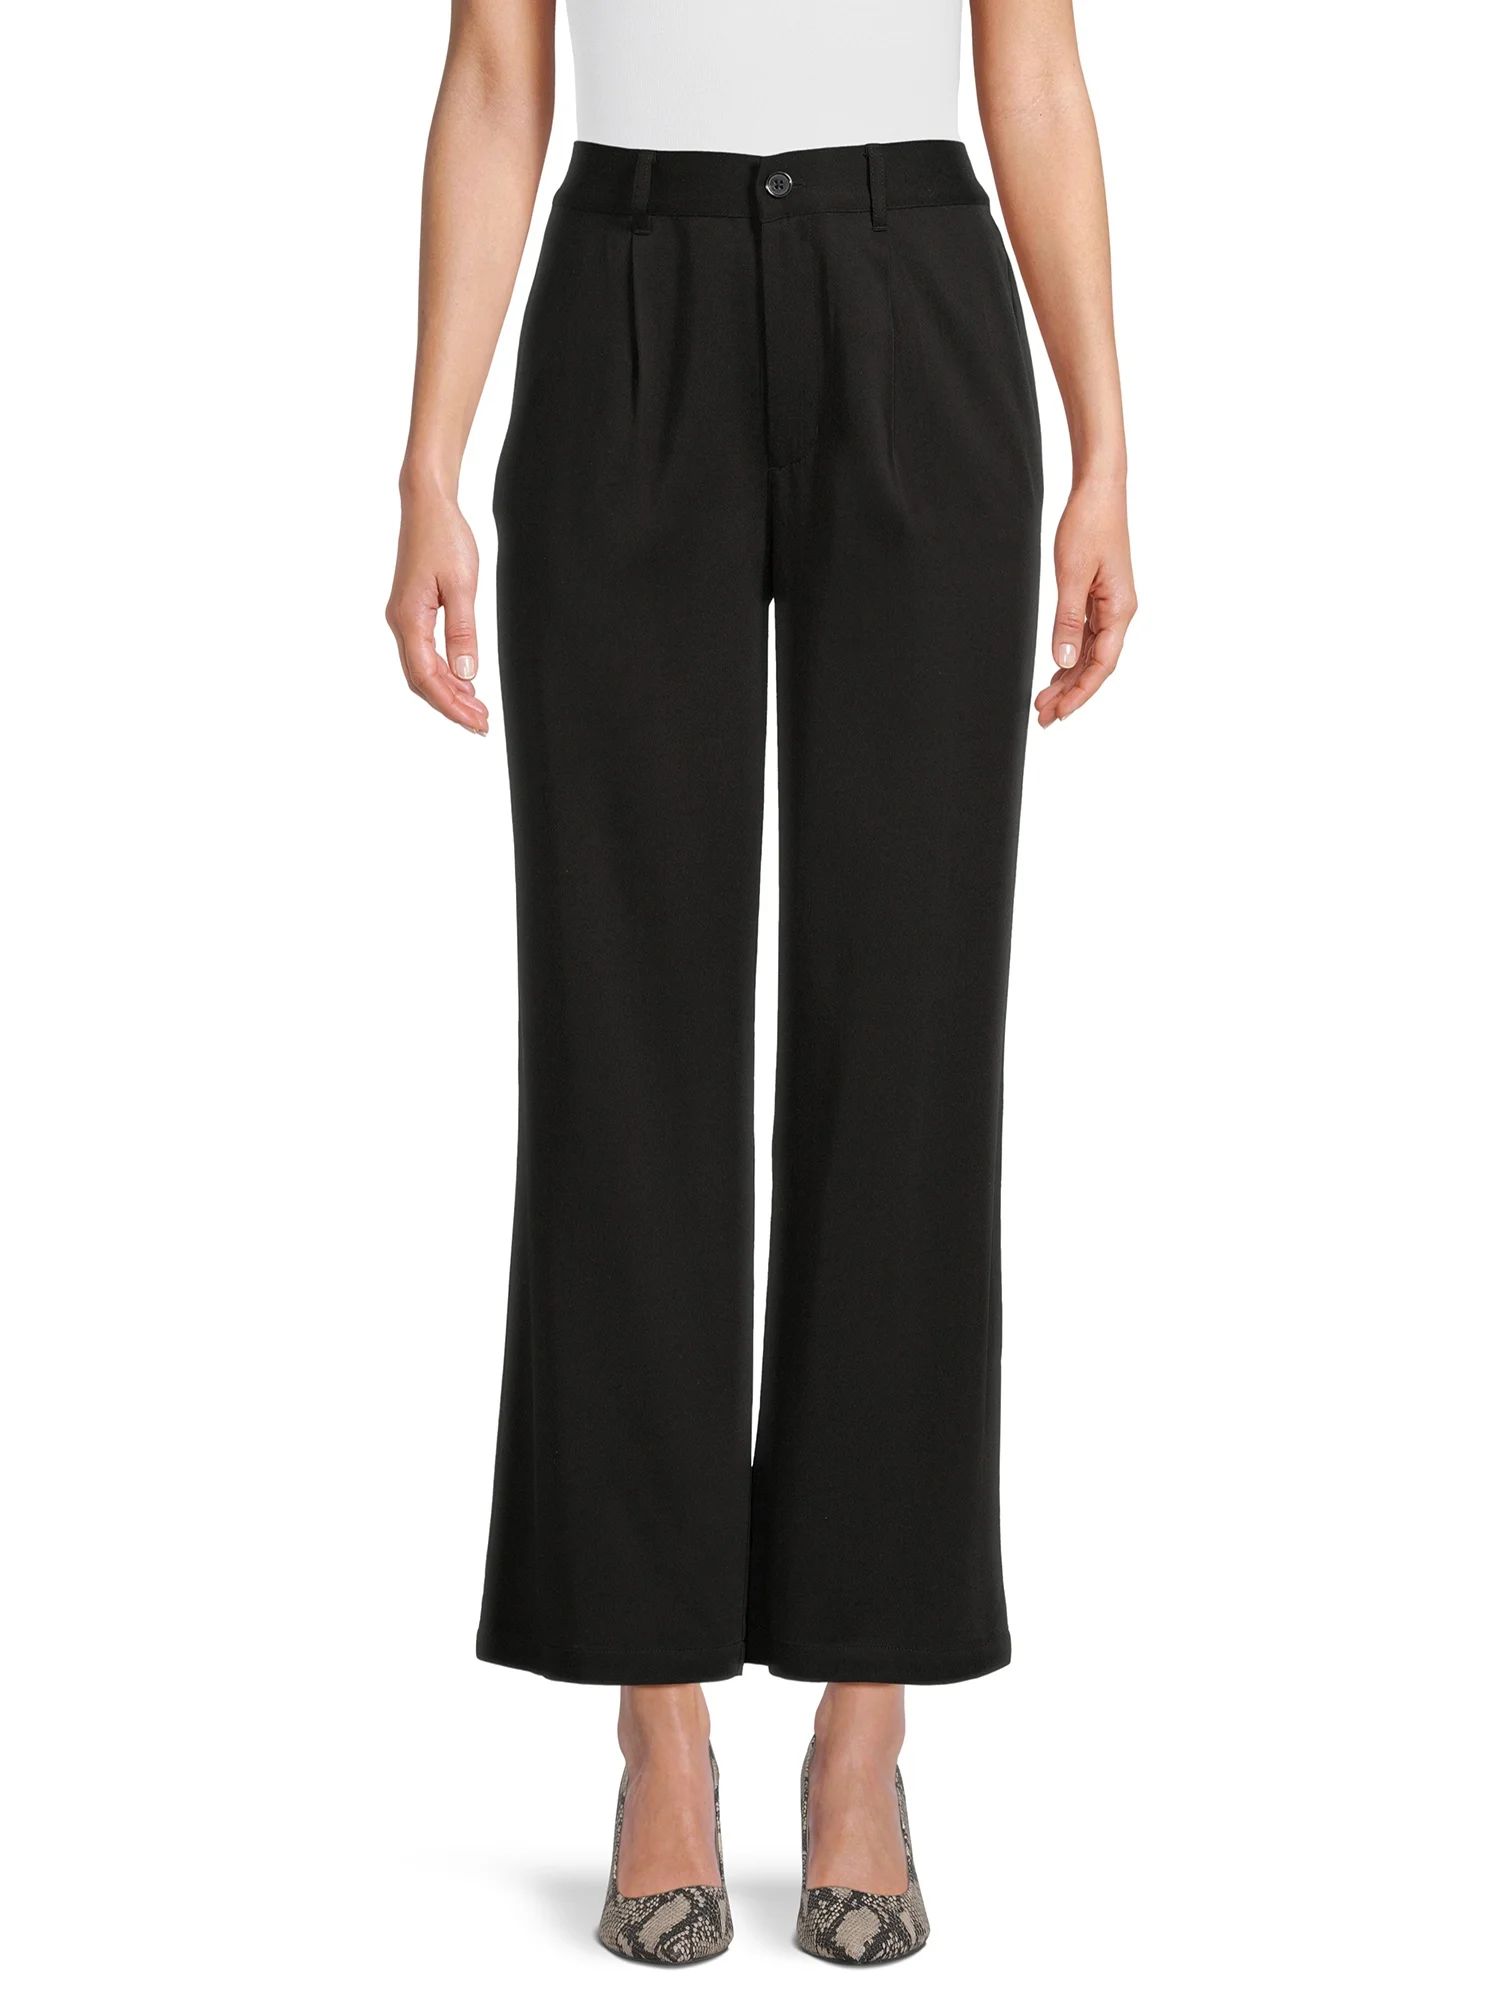 Time and Tru Women's Pleated Wide Leg Pants with Side Slant Pockets, 30" Inseam, Sizes S-3XL | Walmart (US)